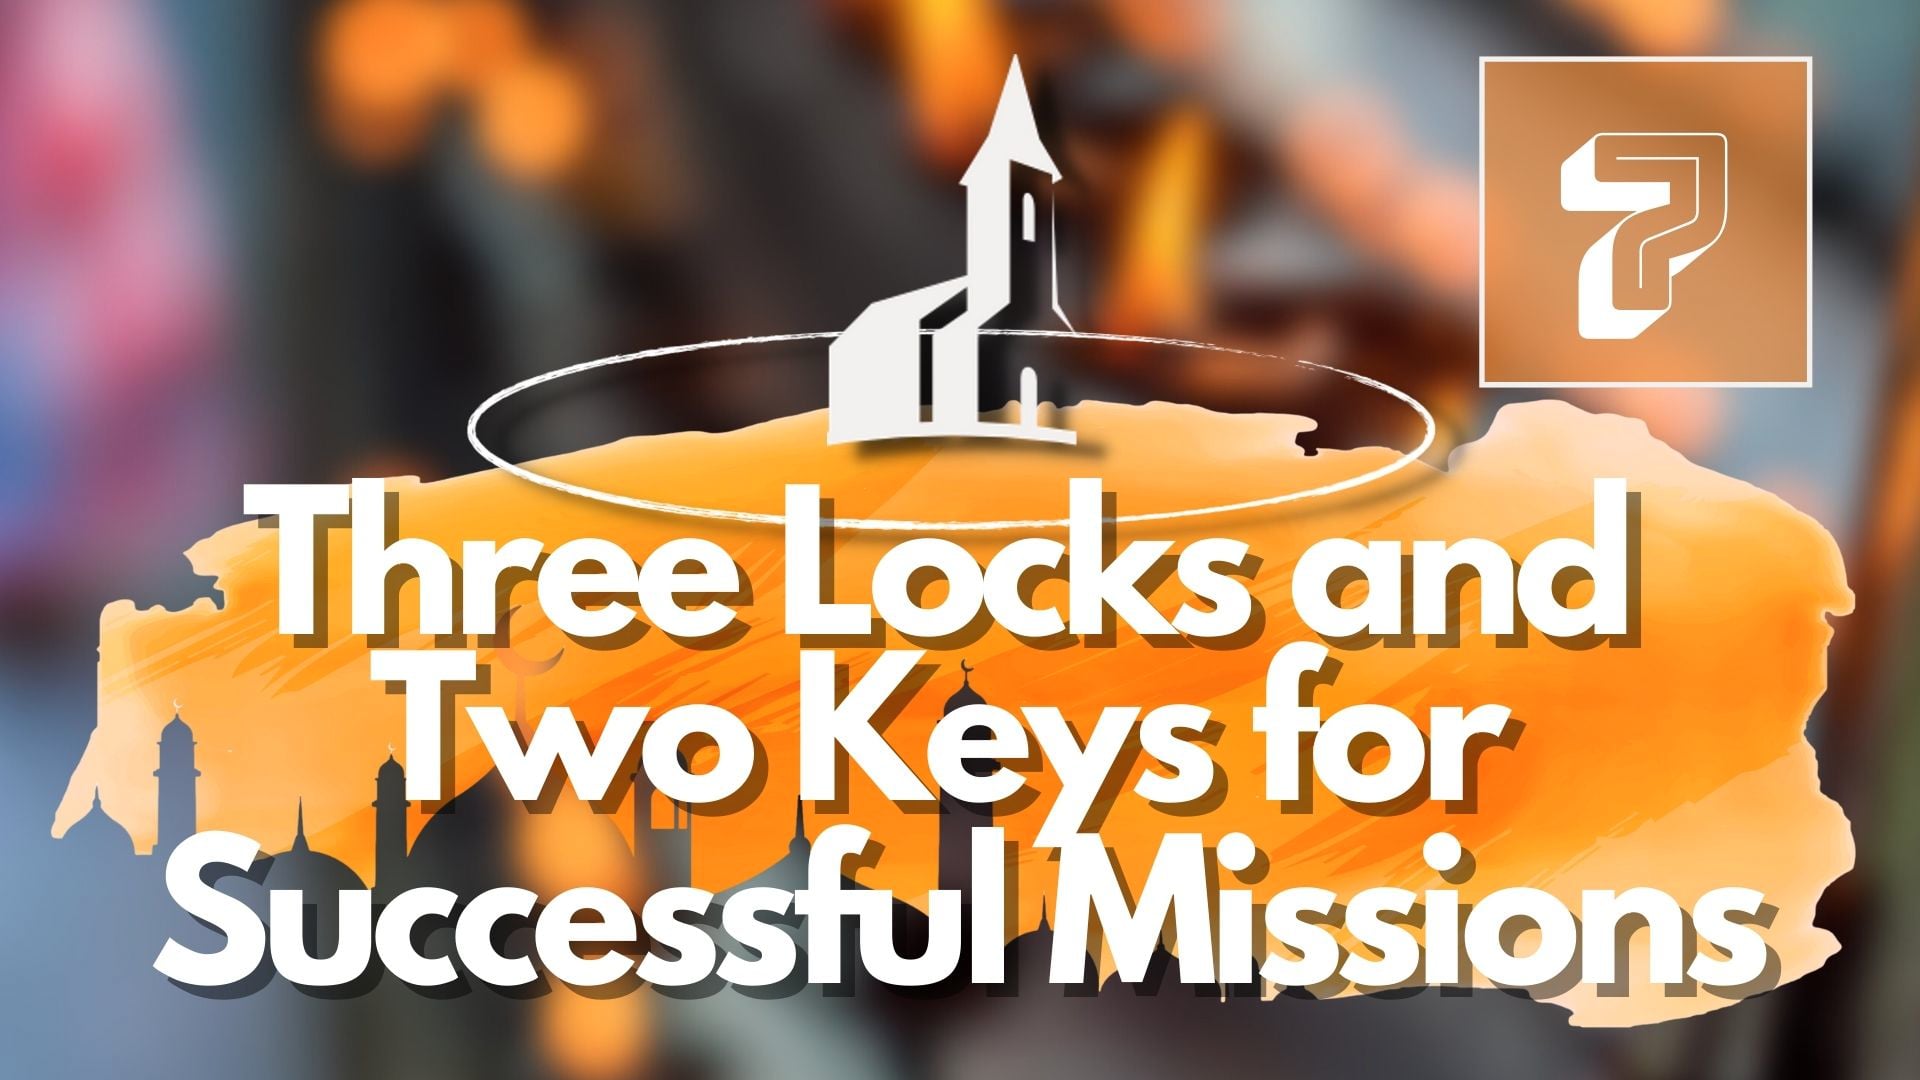 7. Three Locks and Two Keys for Successful Missions – Mike Shipman